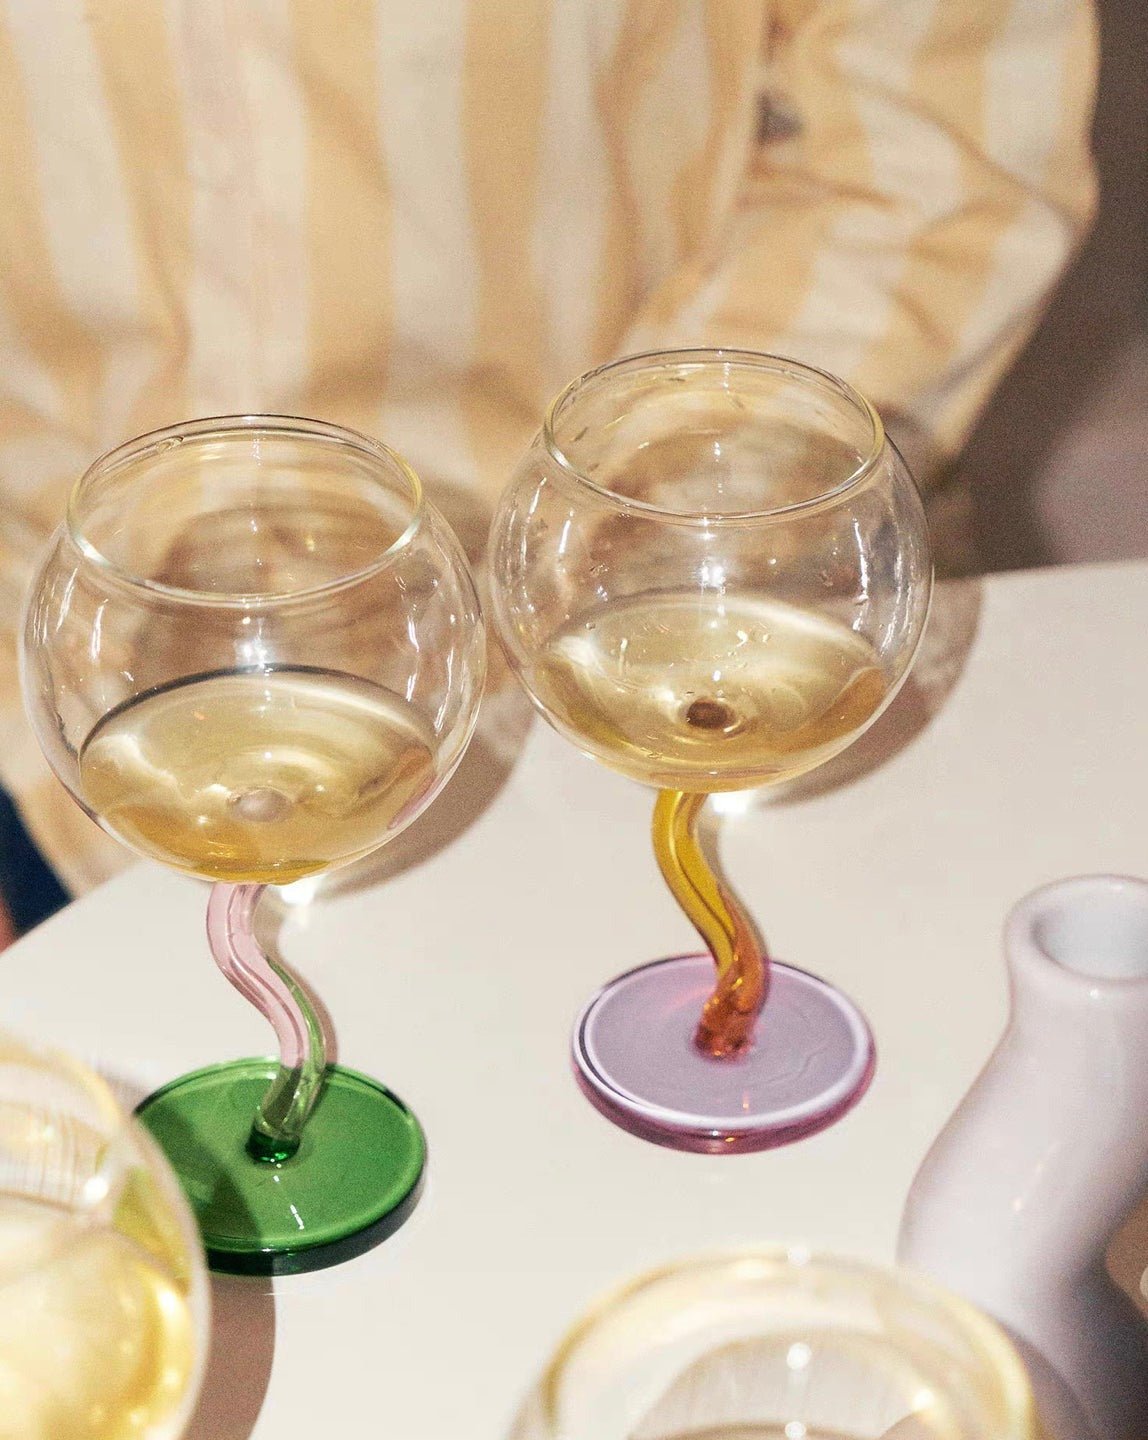 Wine Glasses With Weirdly Wobbling Stems